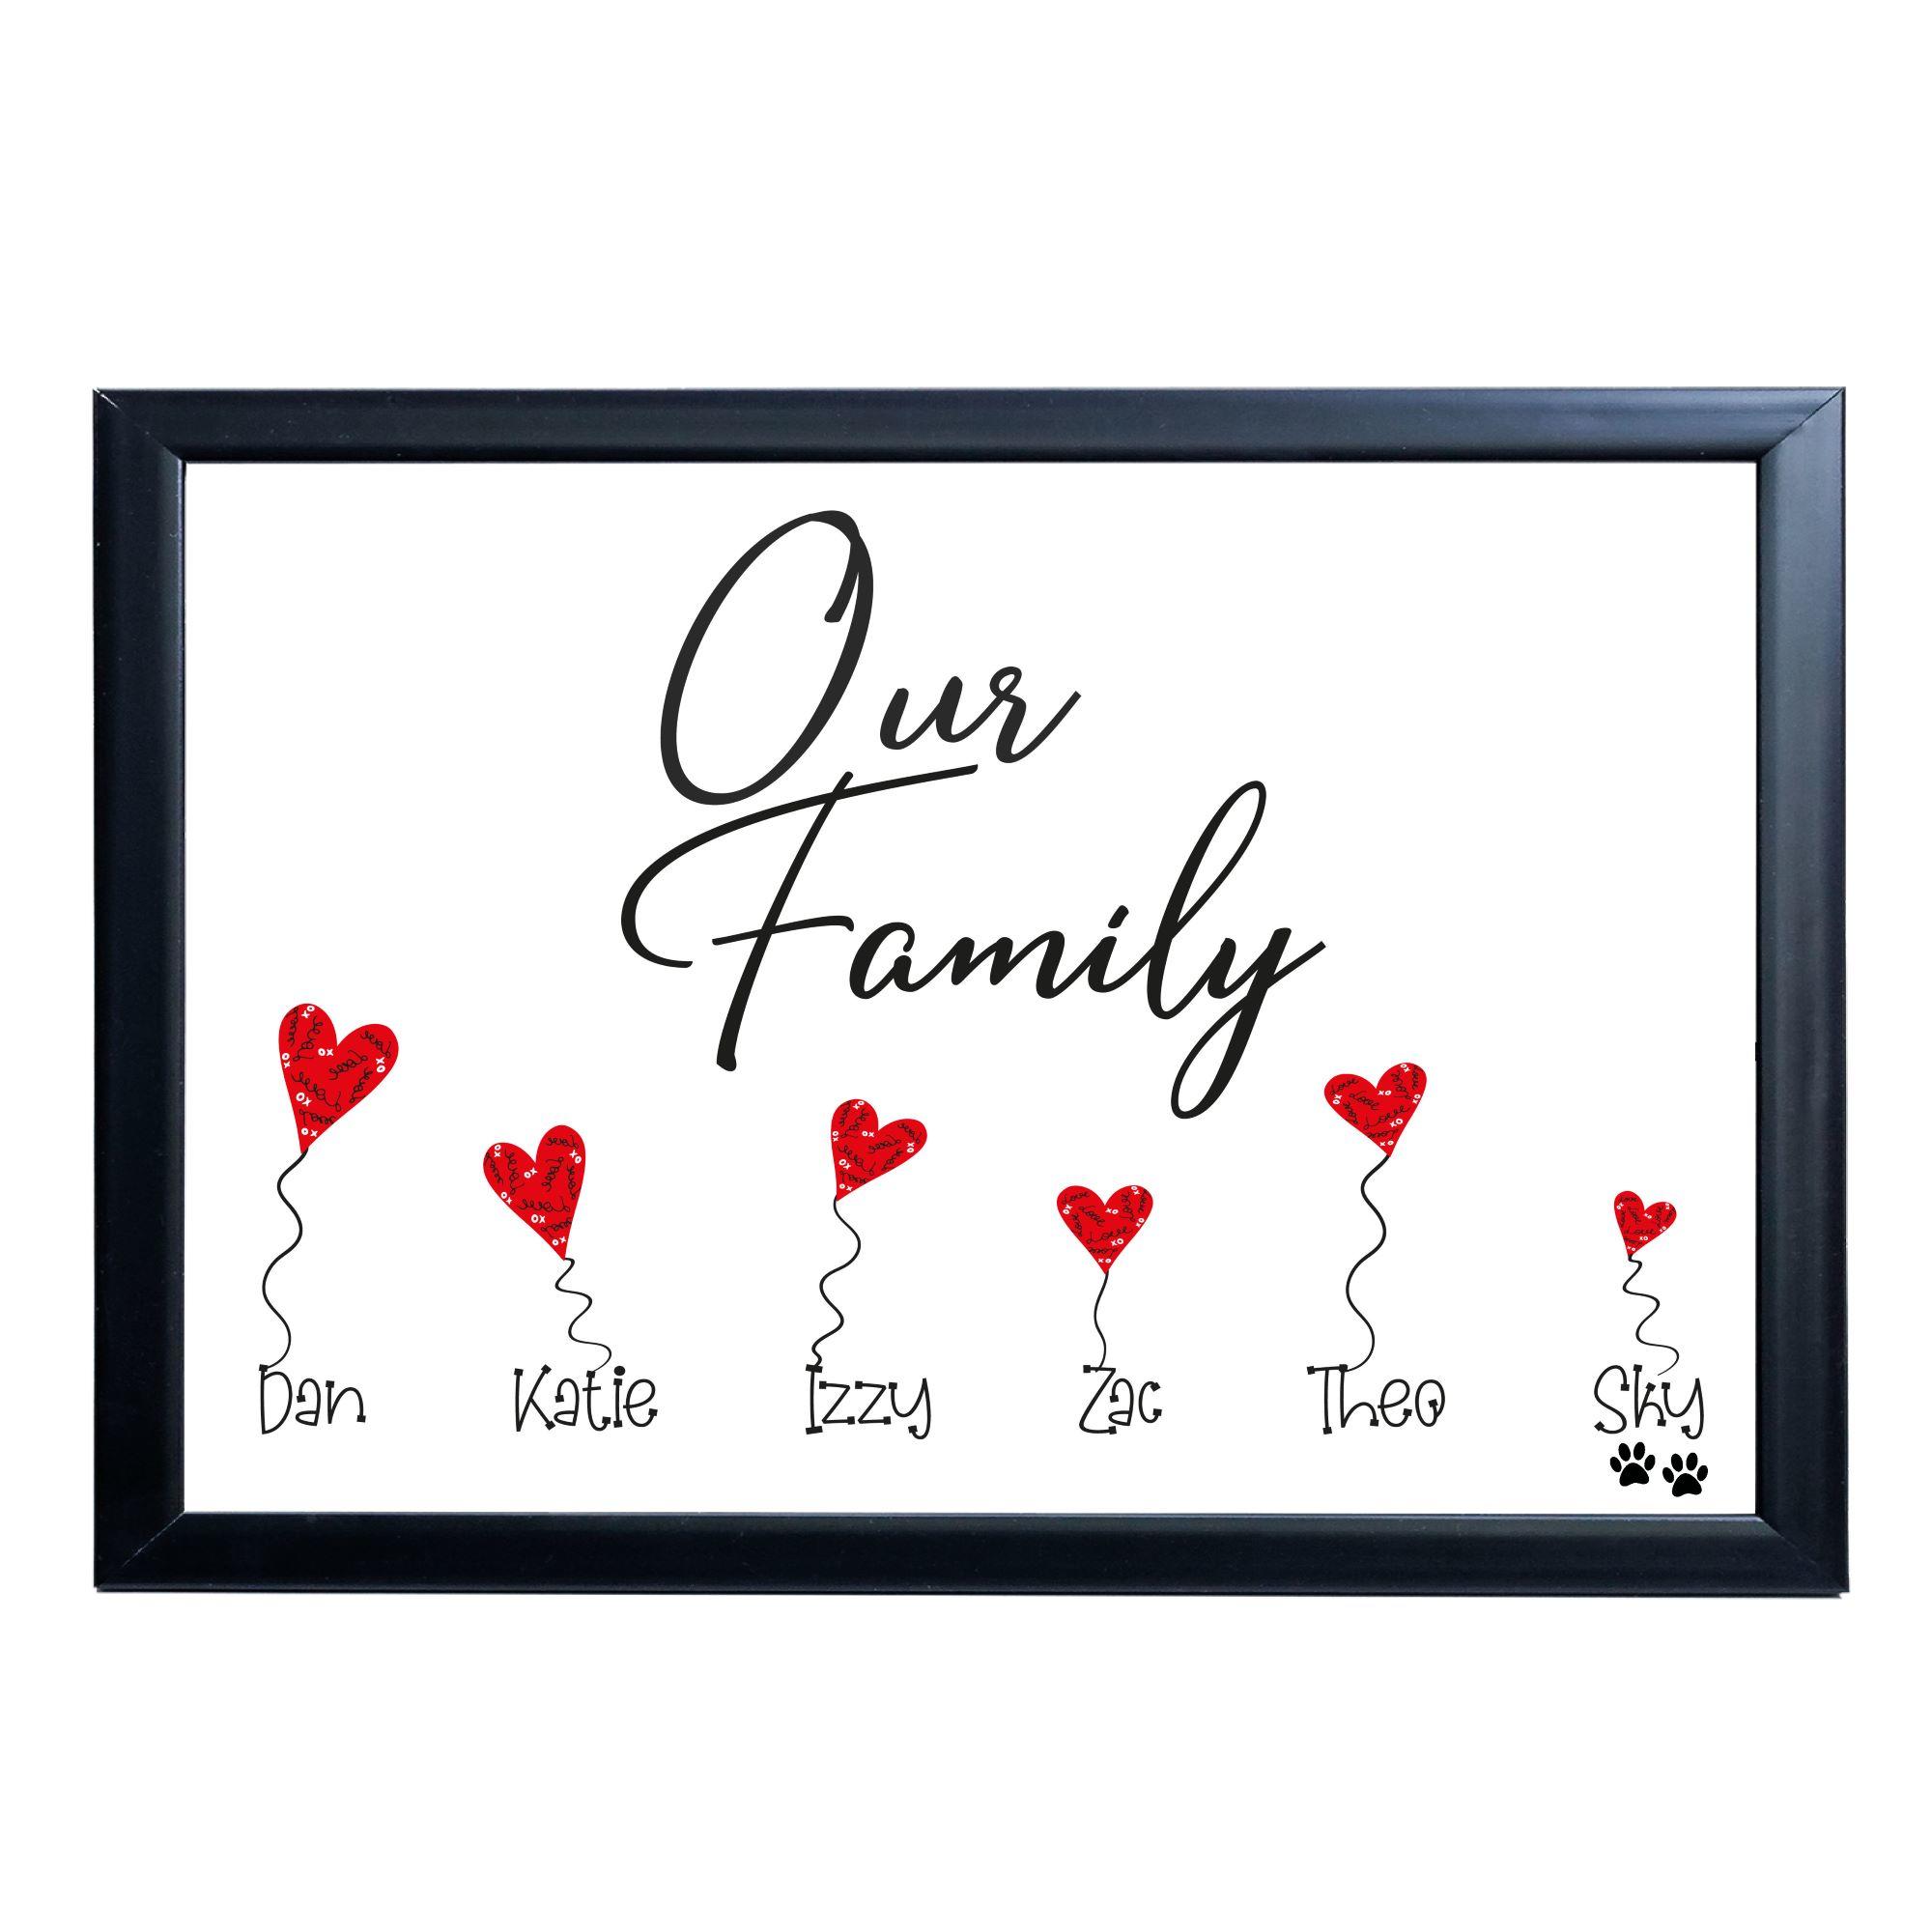 Personalised Family Print,Gift, Birthday,New Home Gift,Fathers Day Gift,Love Heart Balloons,Family Tree,